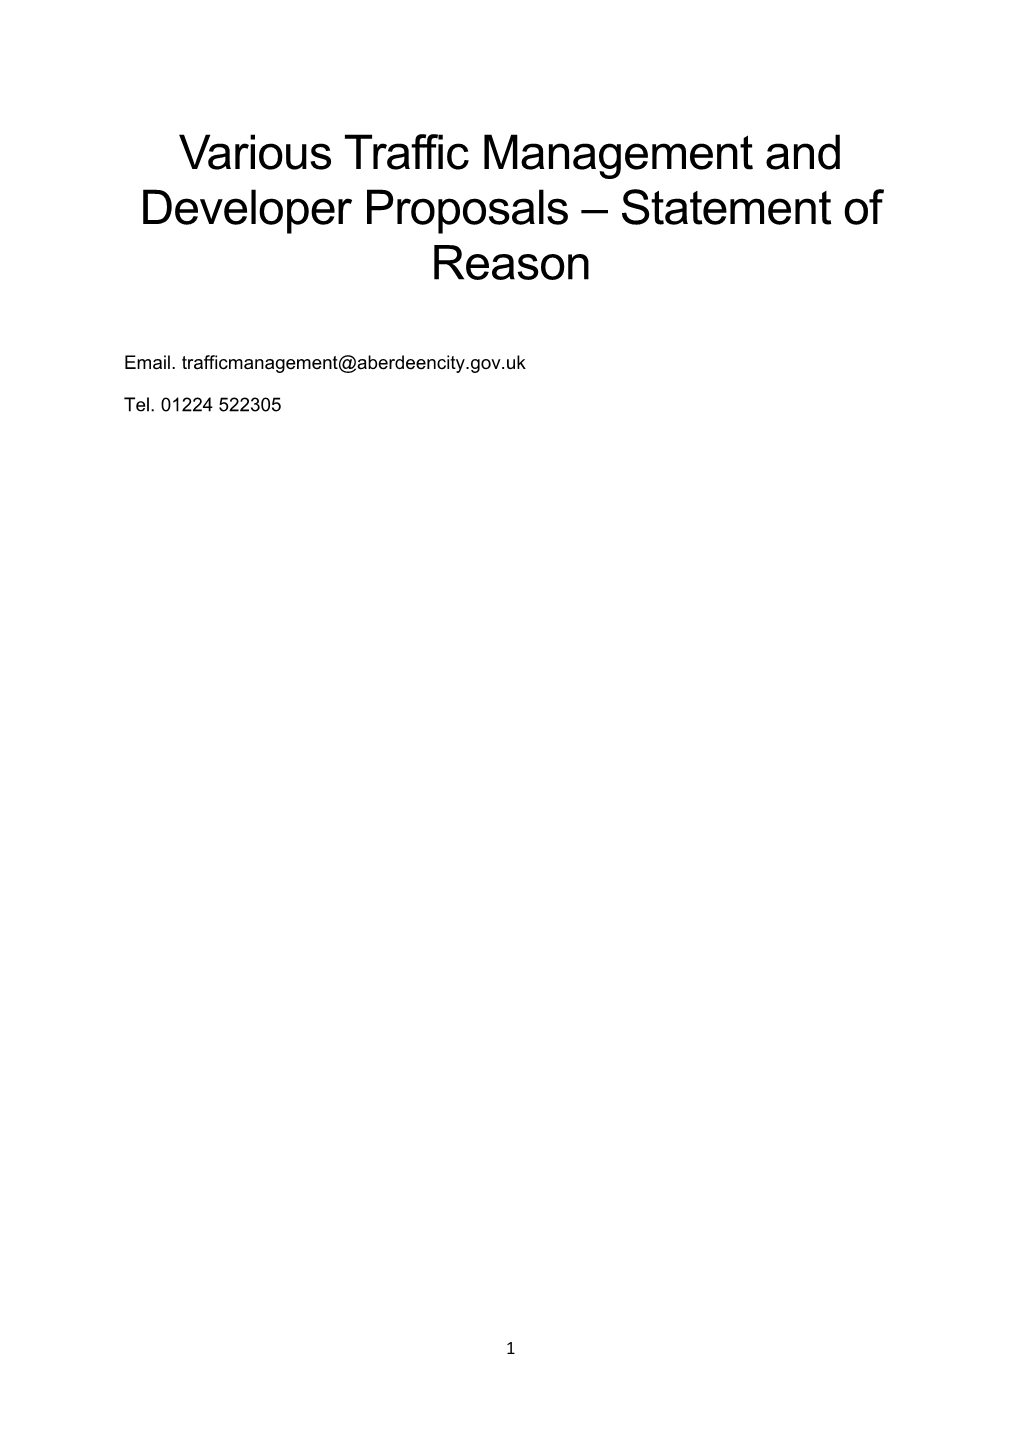 Various Traffic Management and Developer Proposals – Statement of Reason